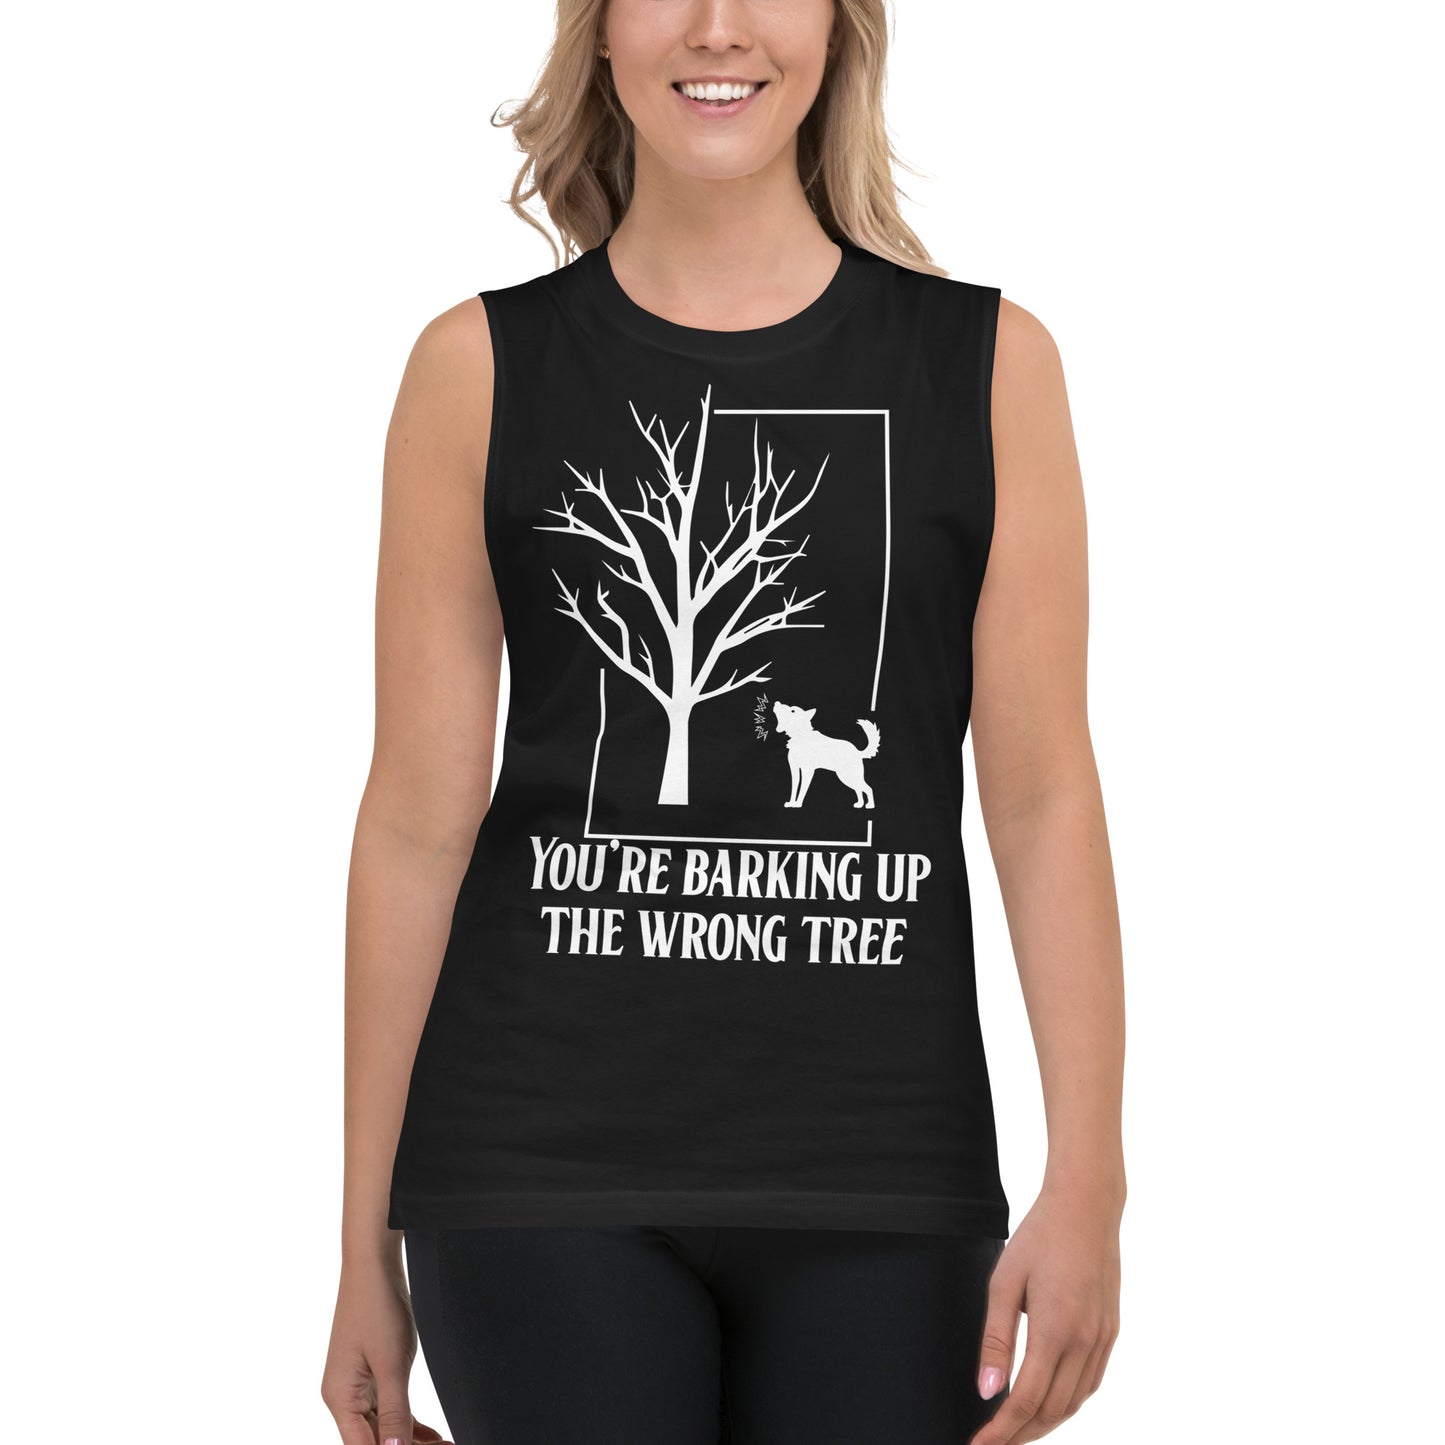 You're Barking Up the Wrong Tree / Unisex Muscle Shirt